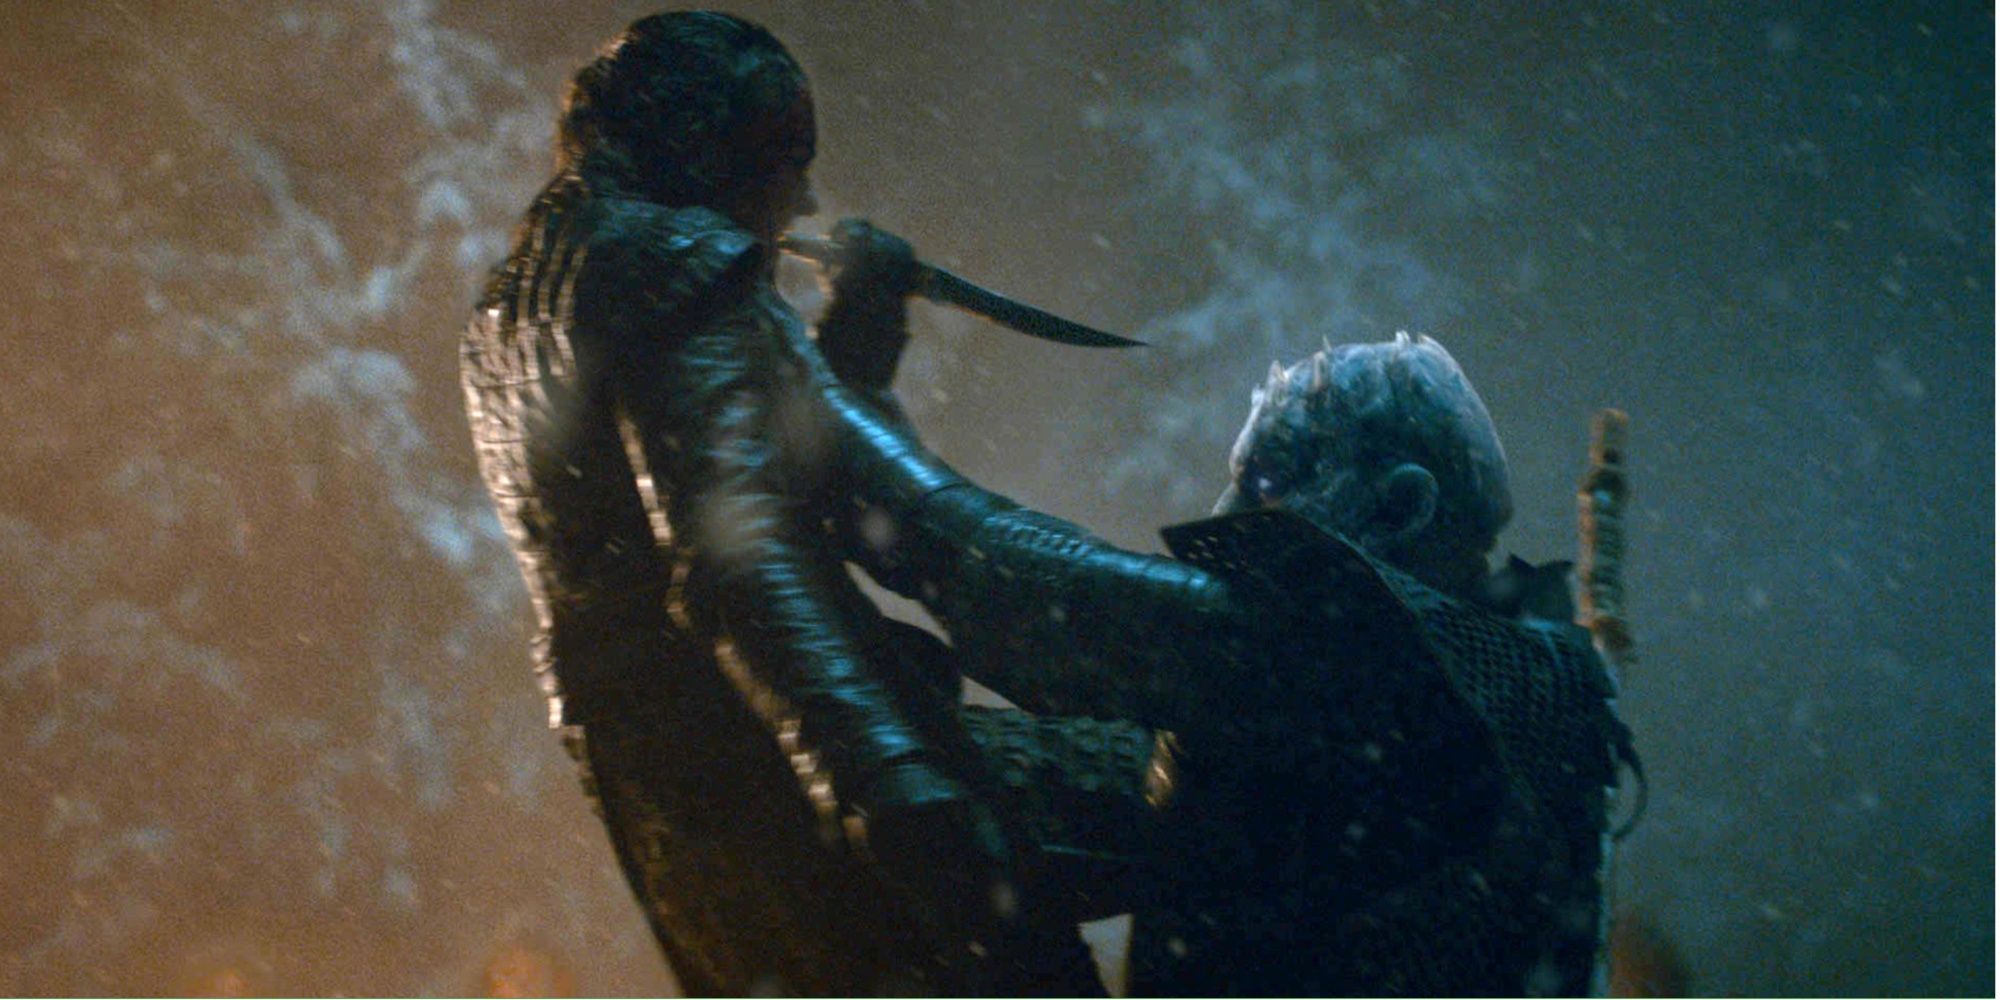 Arya and the Night King in Game of Thrones.